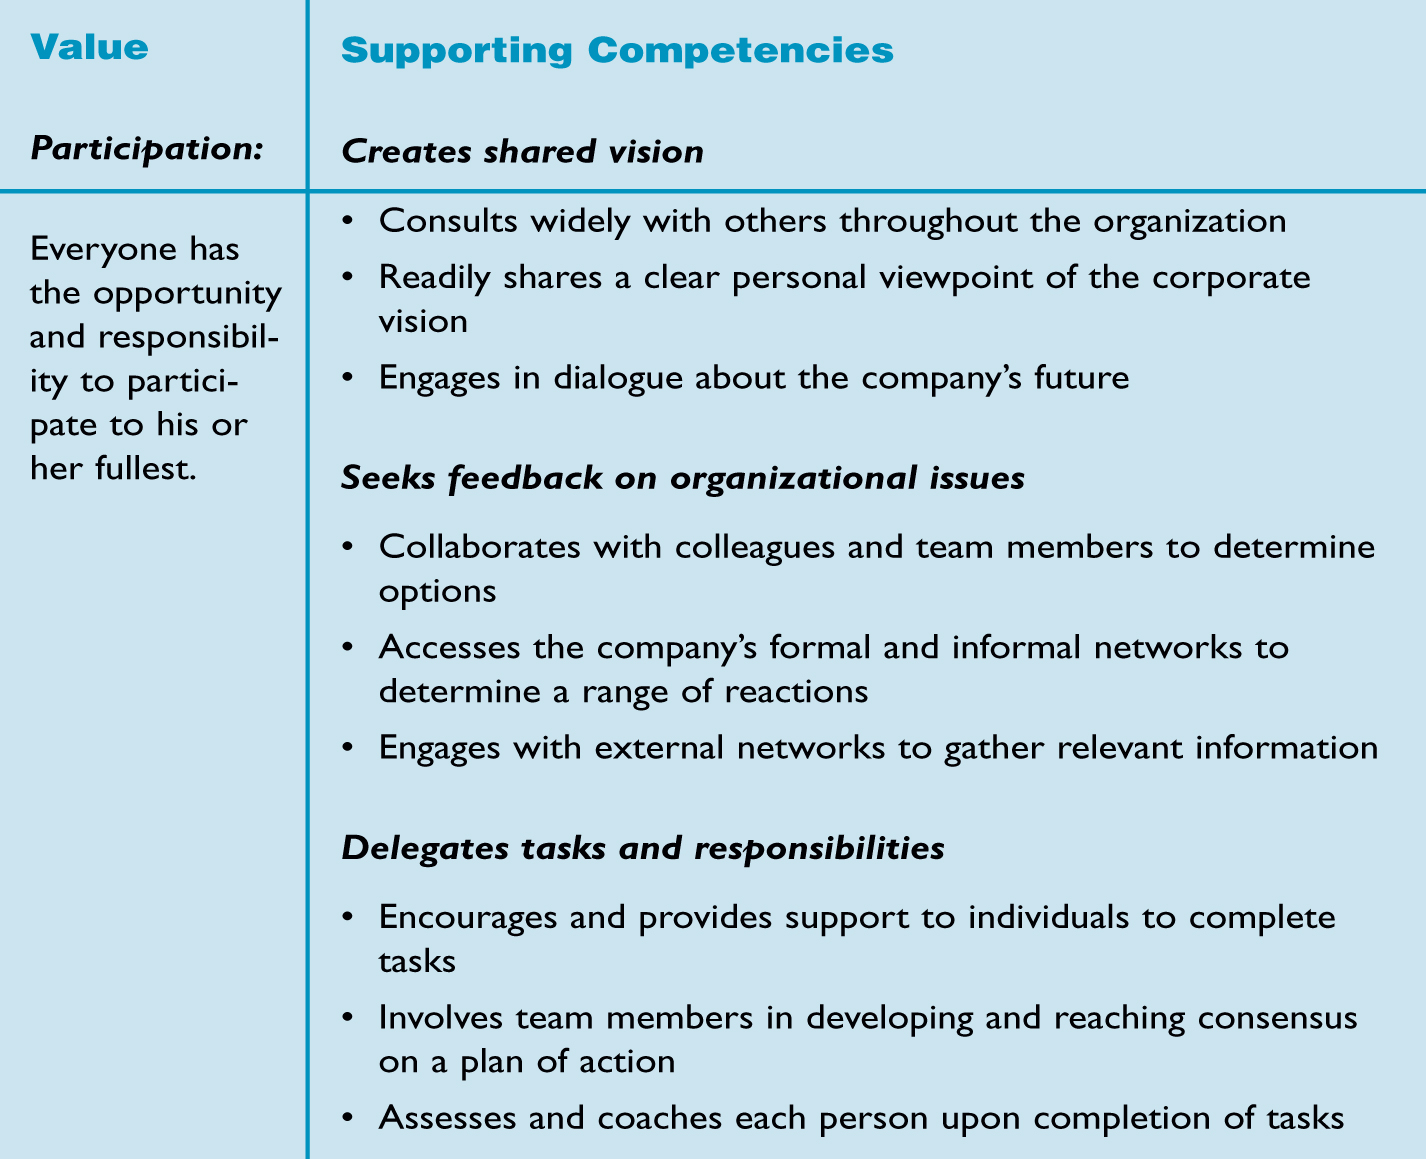 LINKING VALUES AND COMPETENCIES